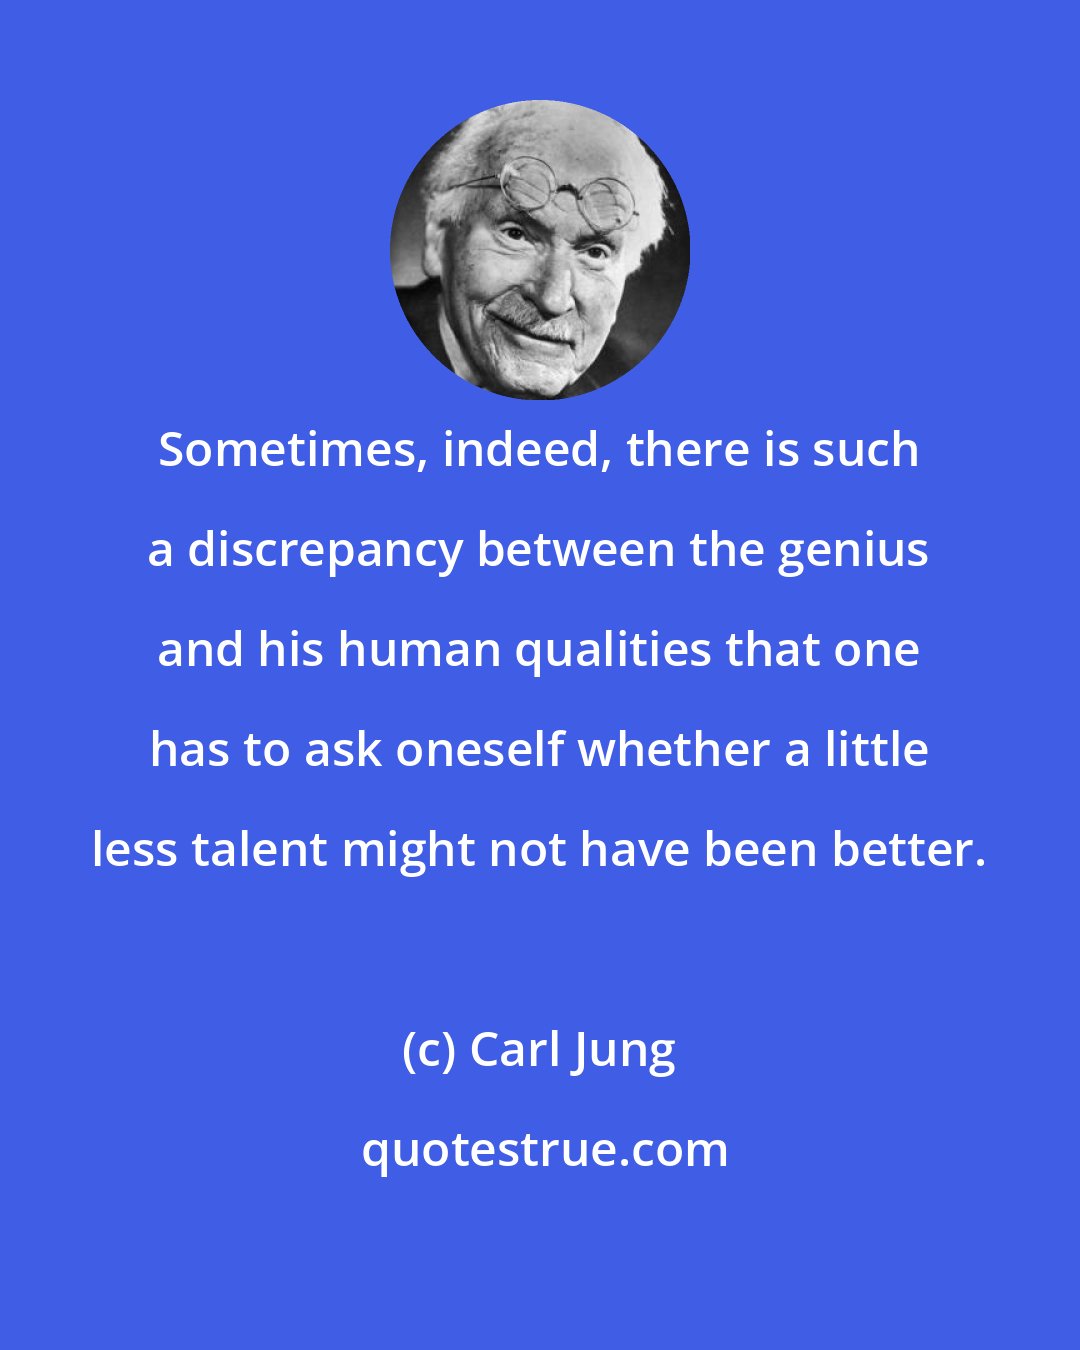 Carl Jung: Sometimes, indeed, there is such a discrepancy between the genius and his human qualities that one has to ask oneself whether a little less talent might not have been better.